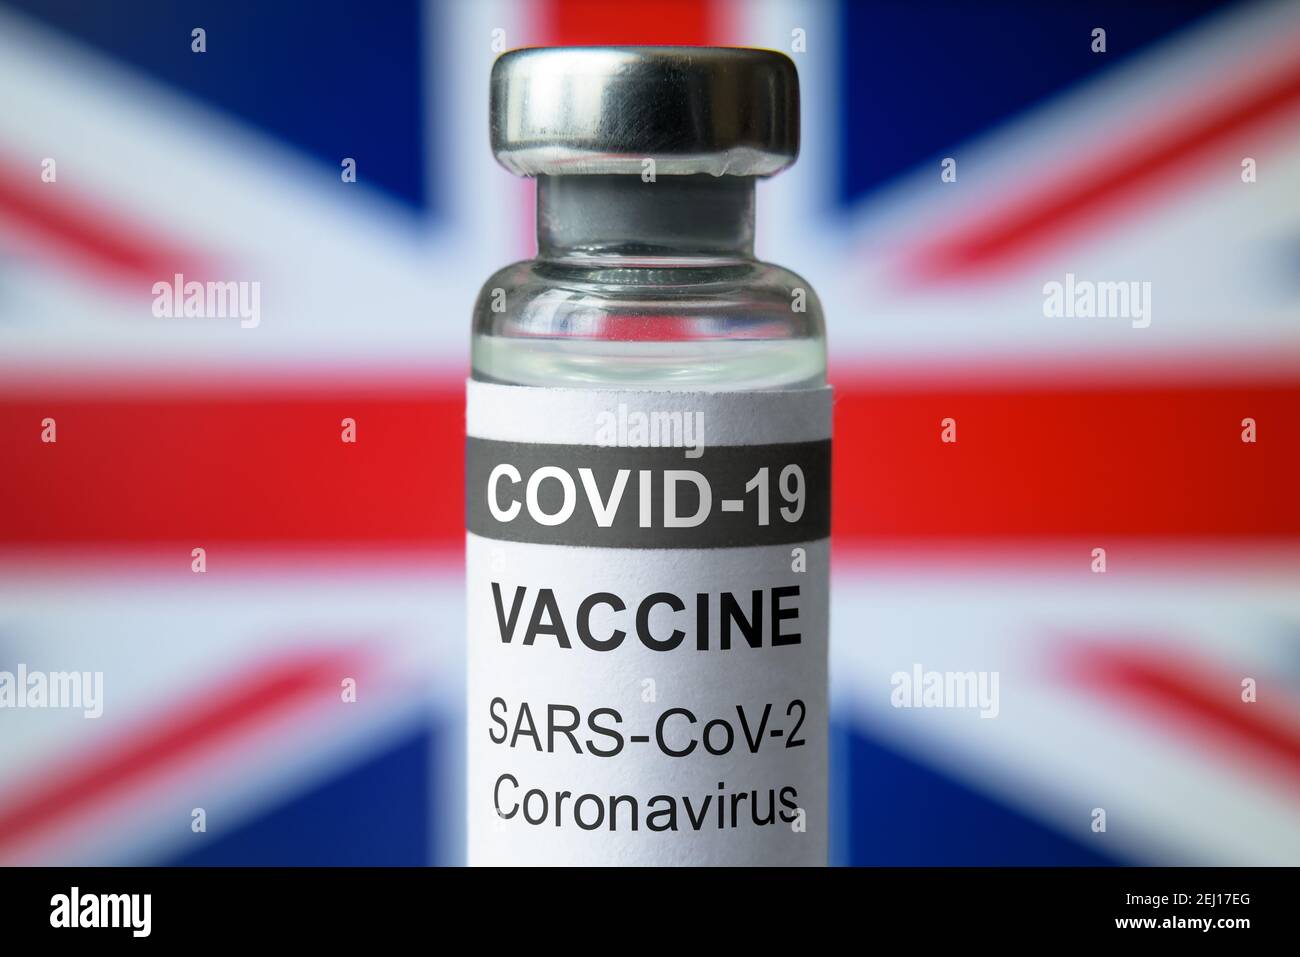 COVID-19 vaccine on UK flag background, bottle with British vaccine for coronavirus close-up. Concept of treatment, clinical trial, distribution and r Stock Photo